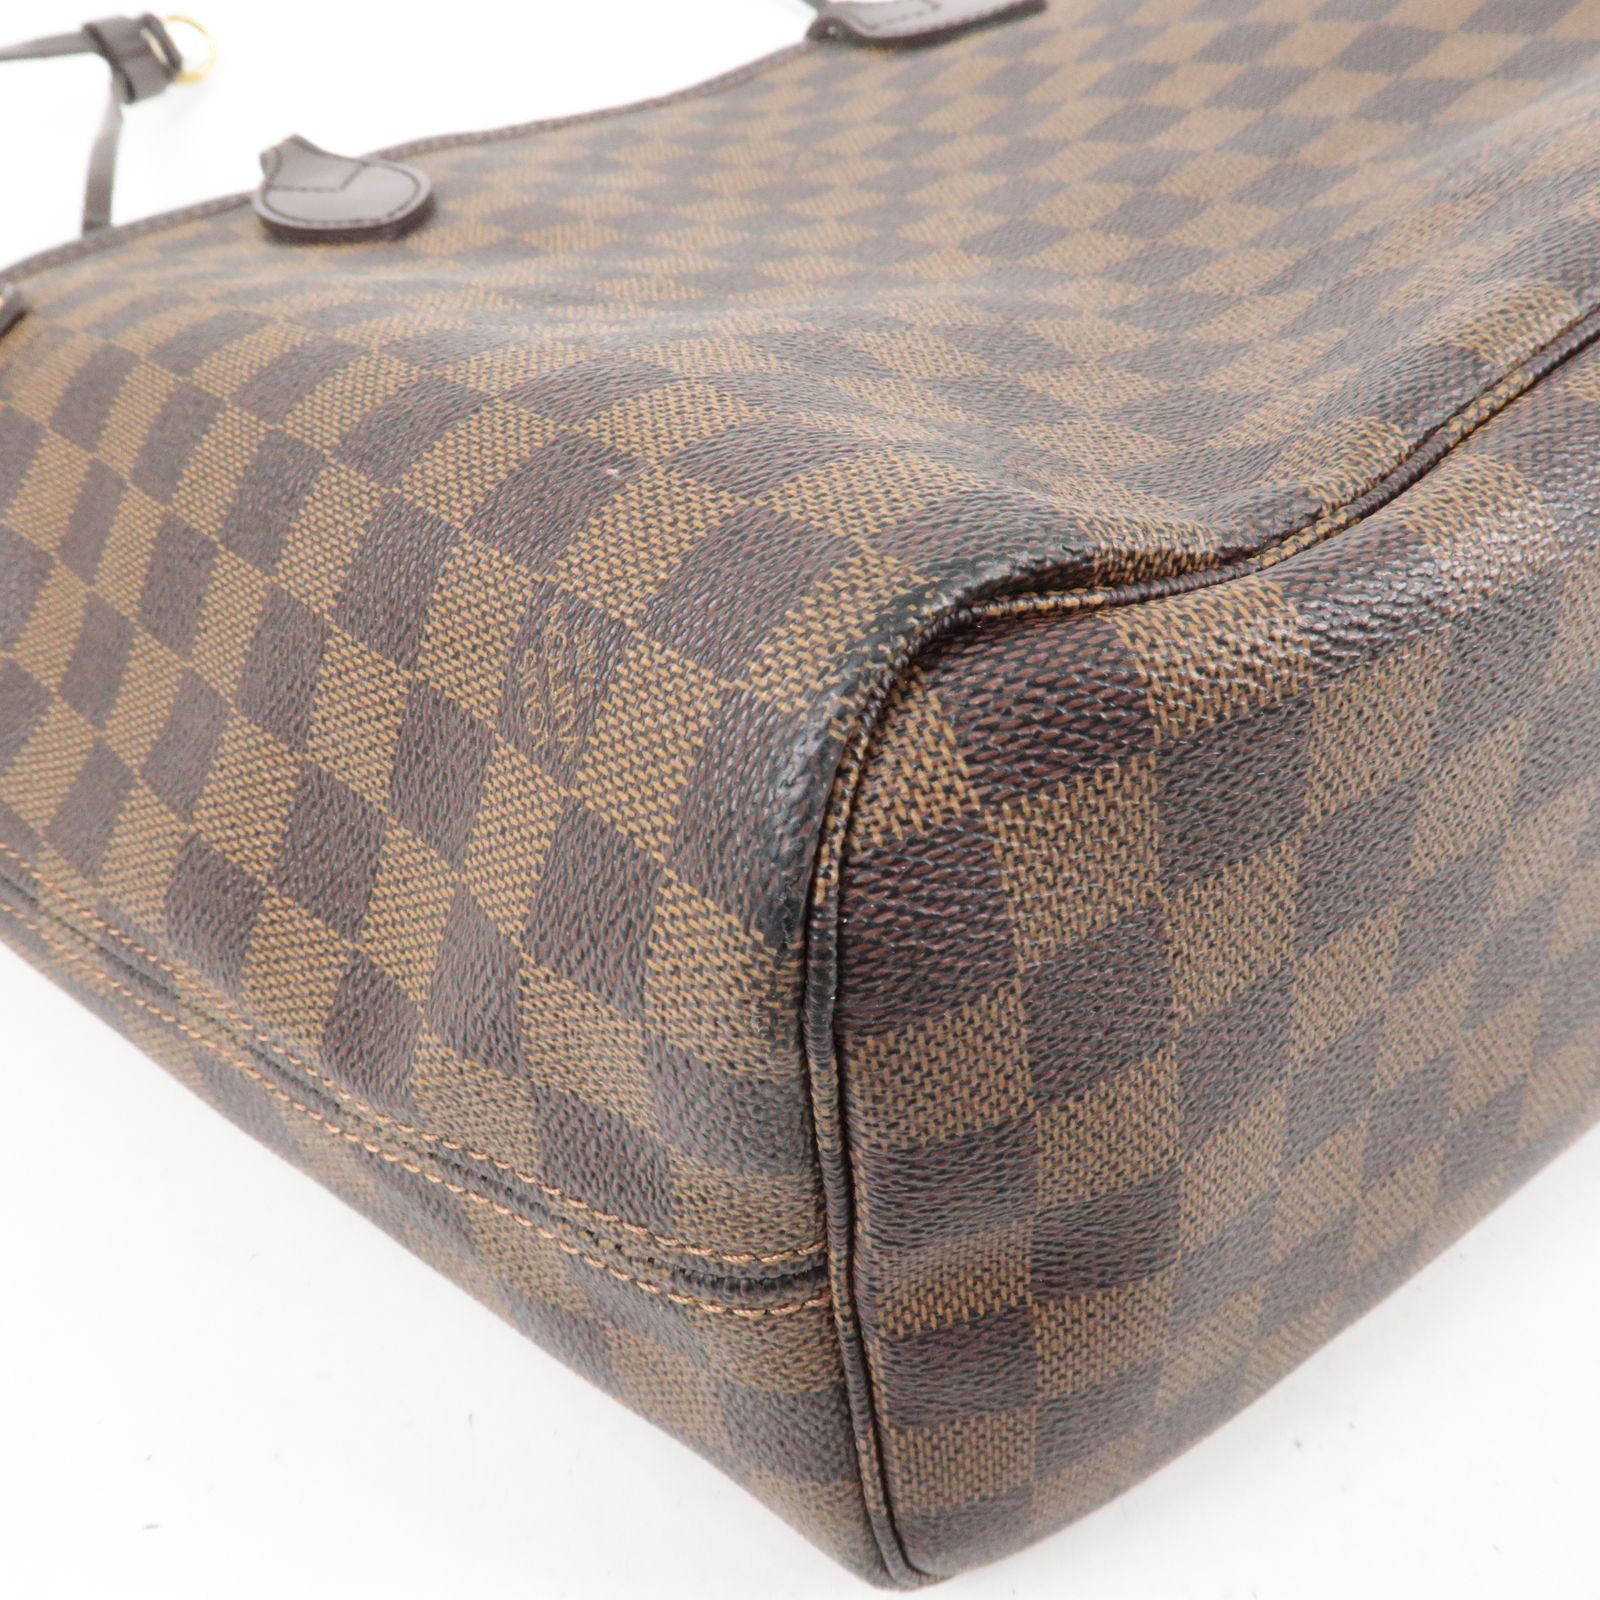 Louis Vuitton Neverfull Mm Limited Edition Damier Azur Canvas Tote Bag